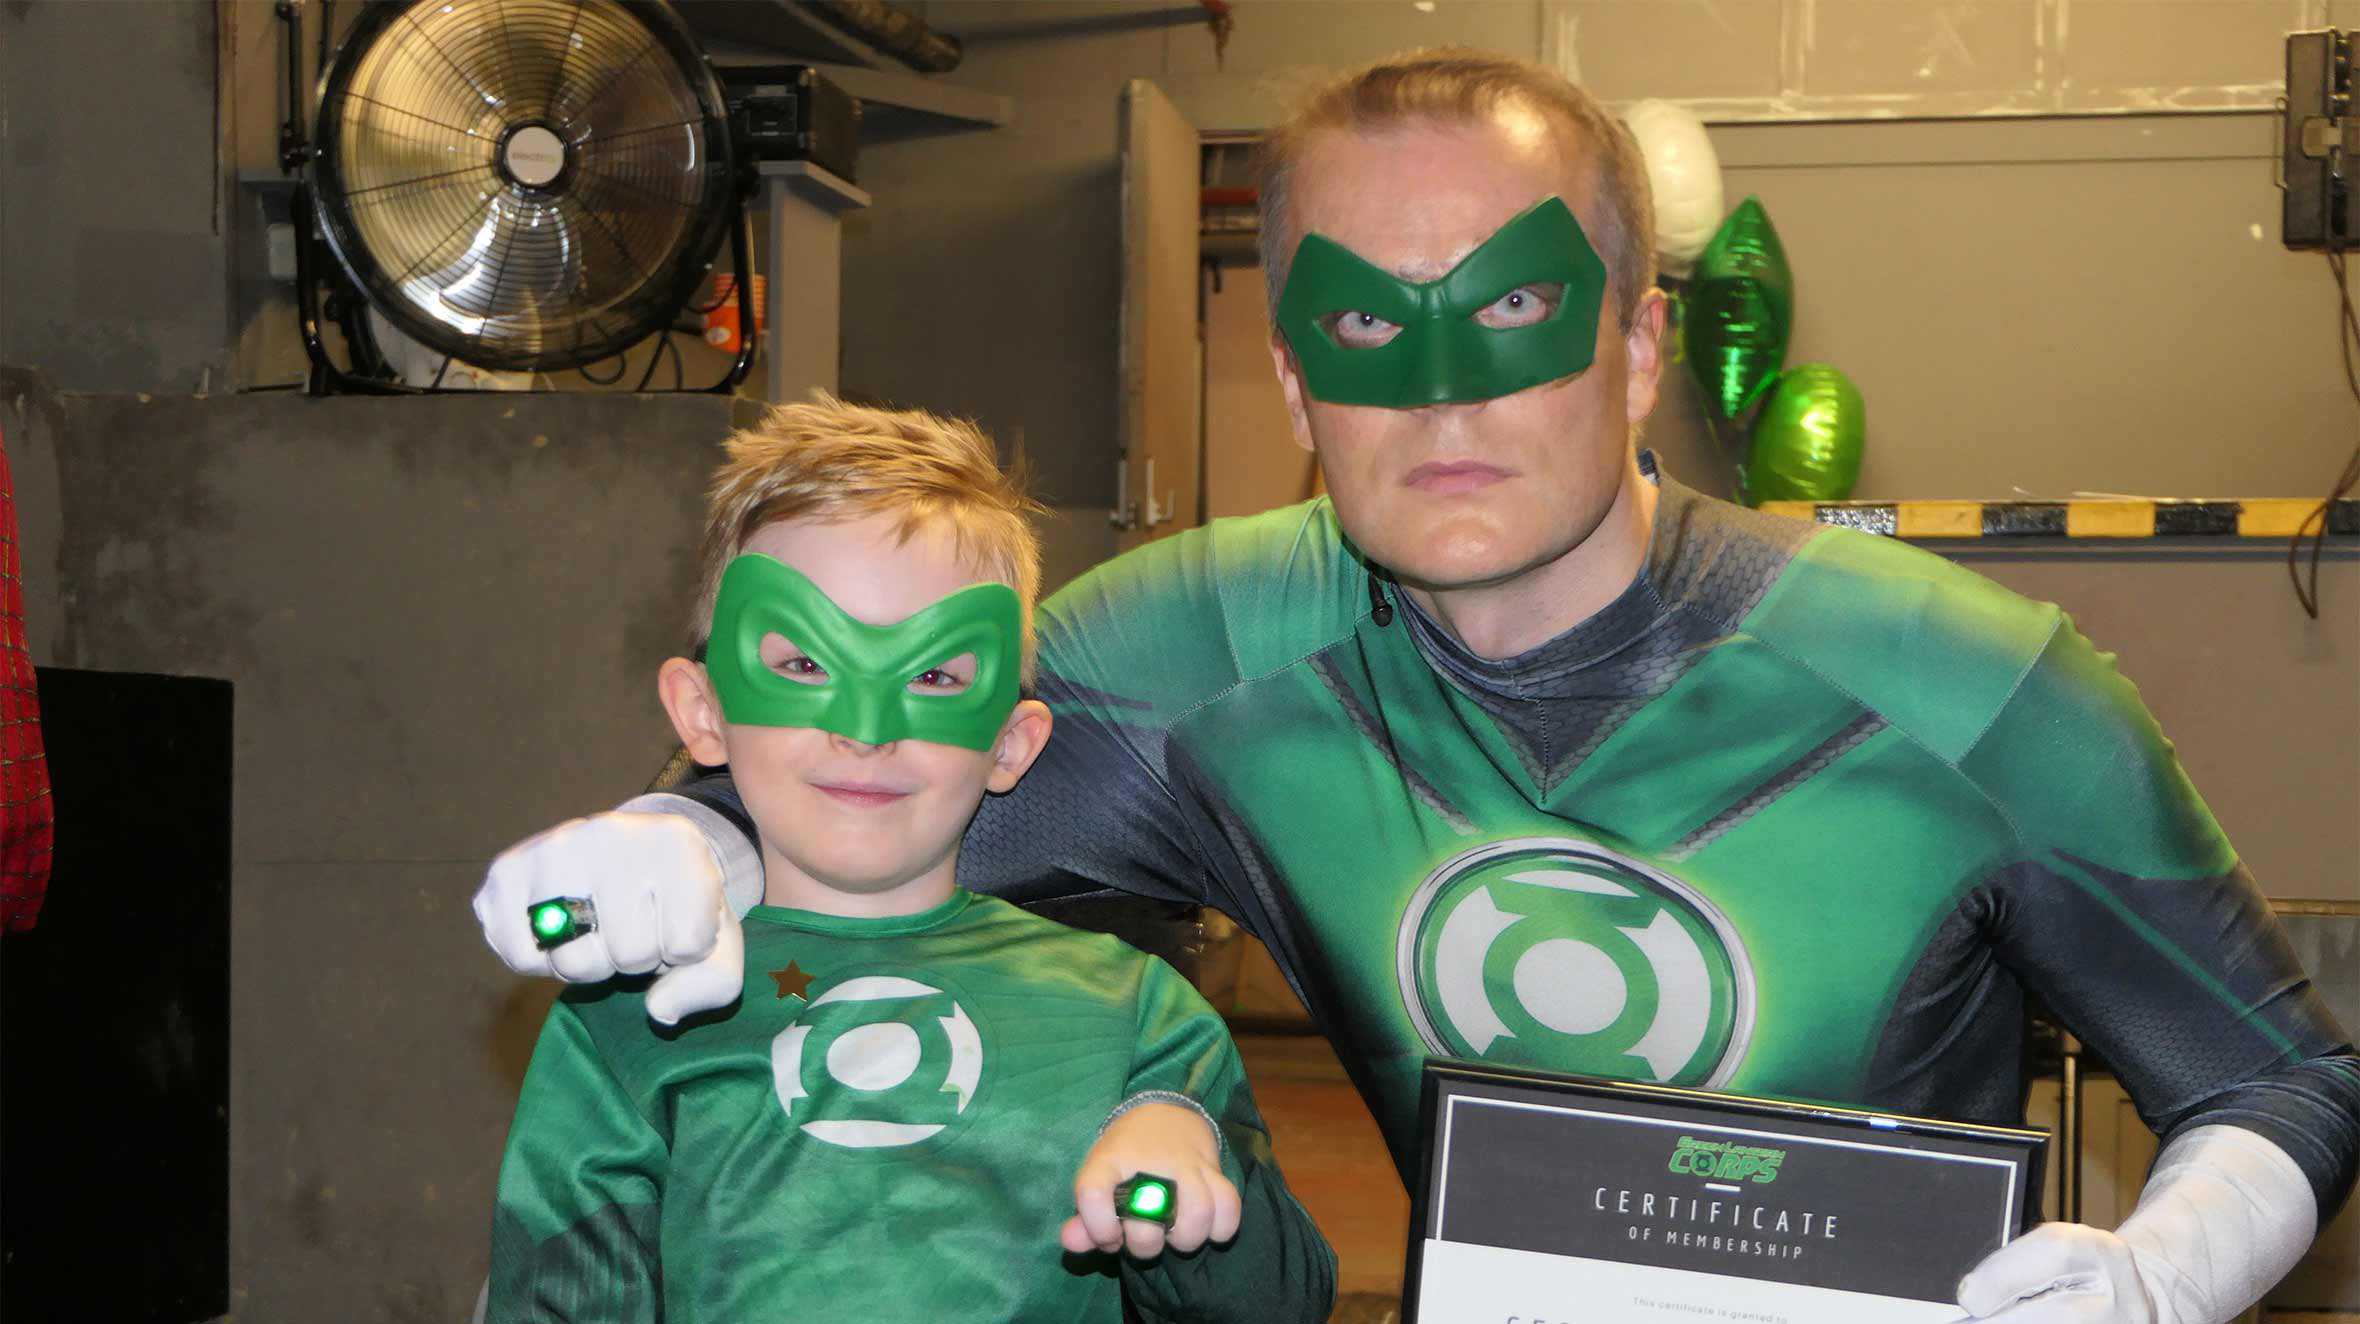 George and the Green Lantern with his certificate of membership